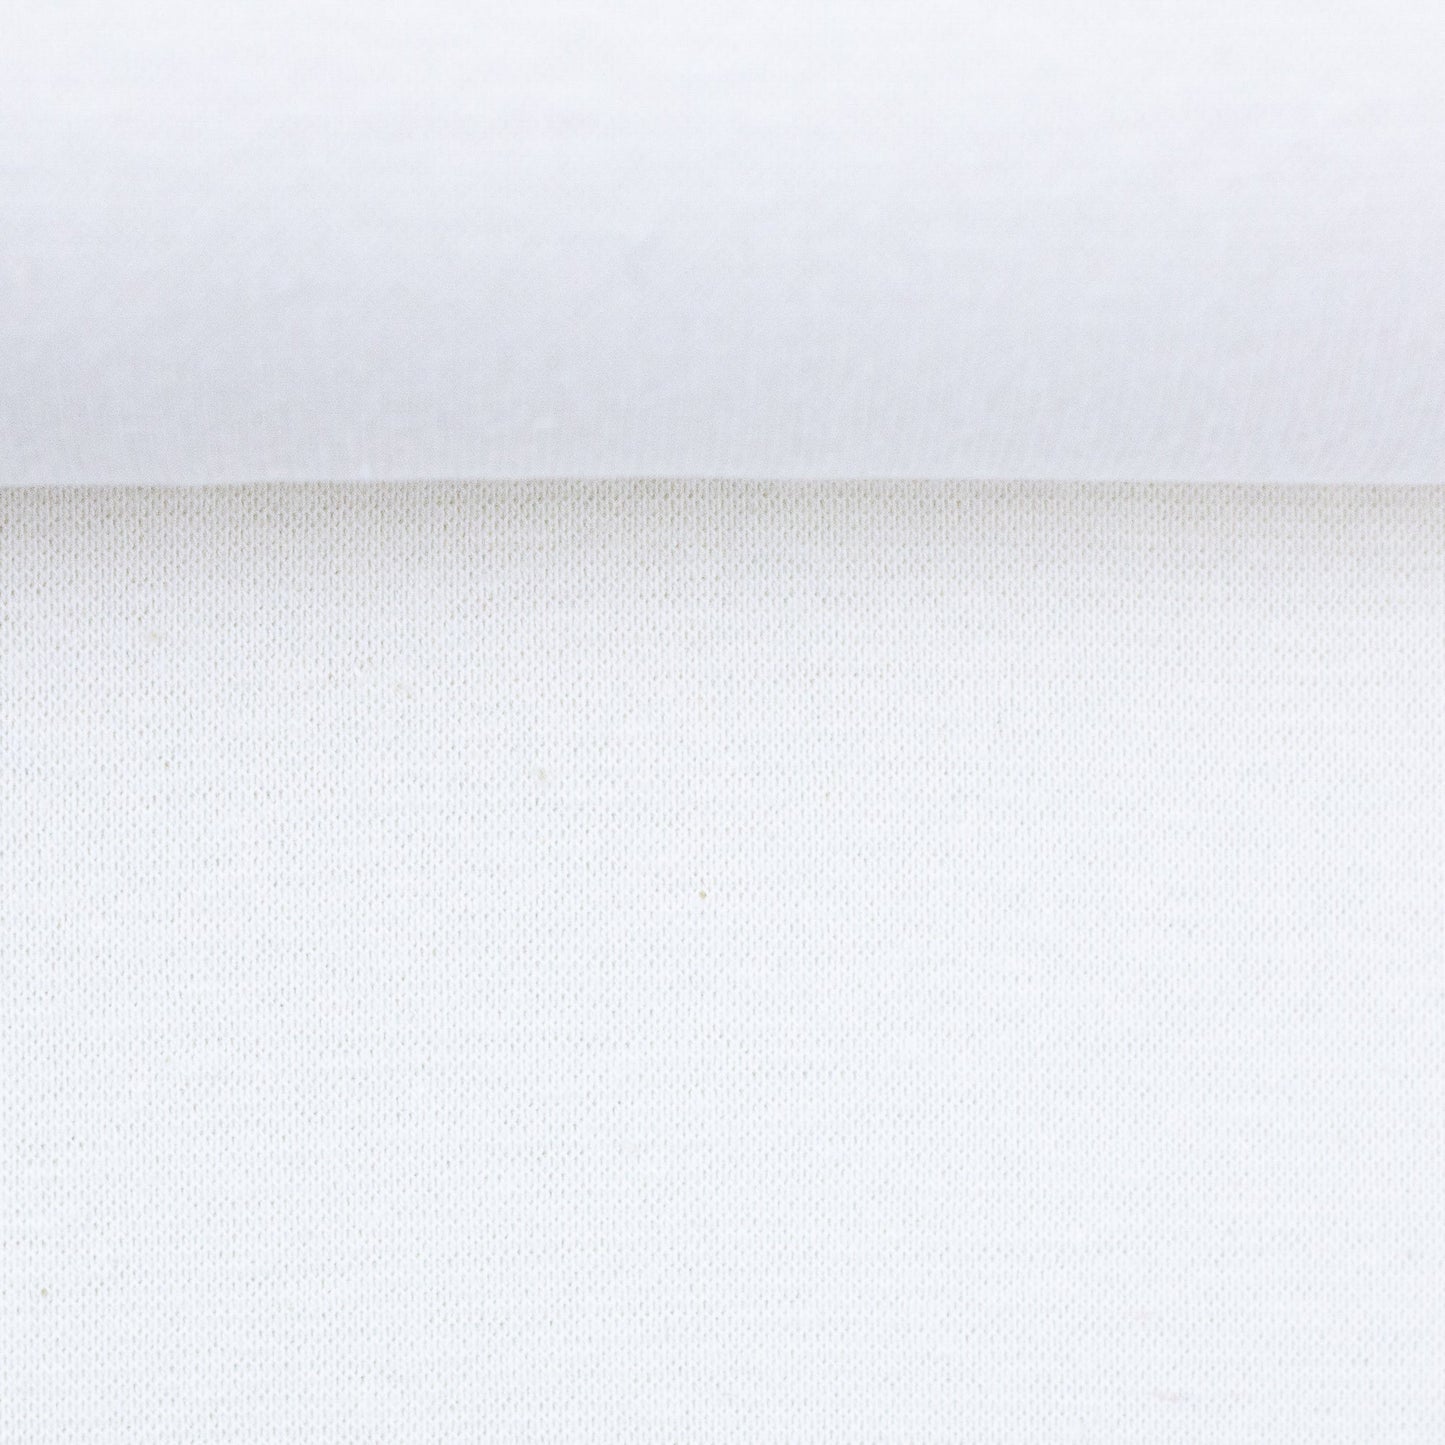 Swafing - Bright White -Snow White - Euro-ribbing - Jersey - French Terry - Fleeced French Terry - 0011 - Little Rhody Sewing Co.